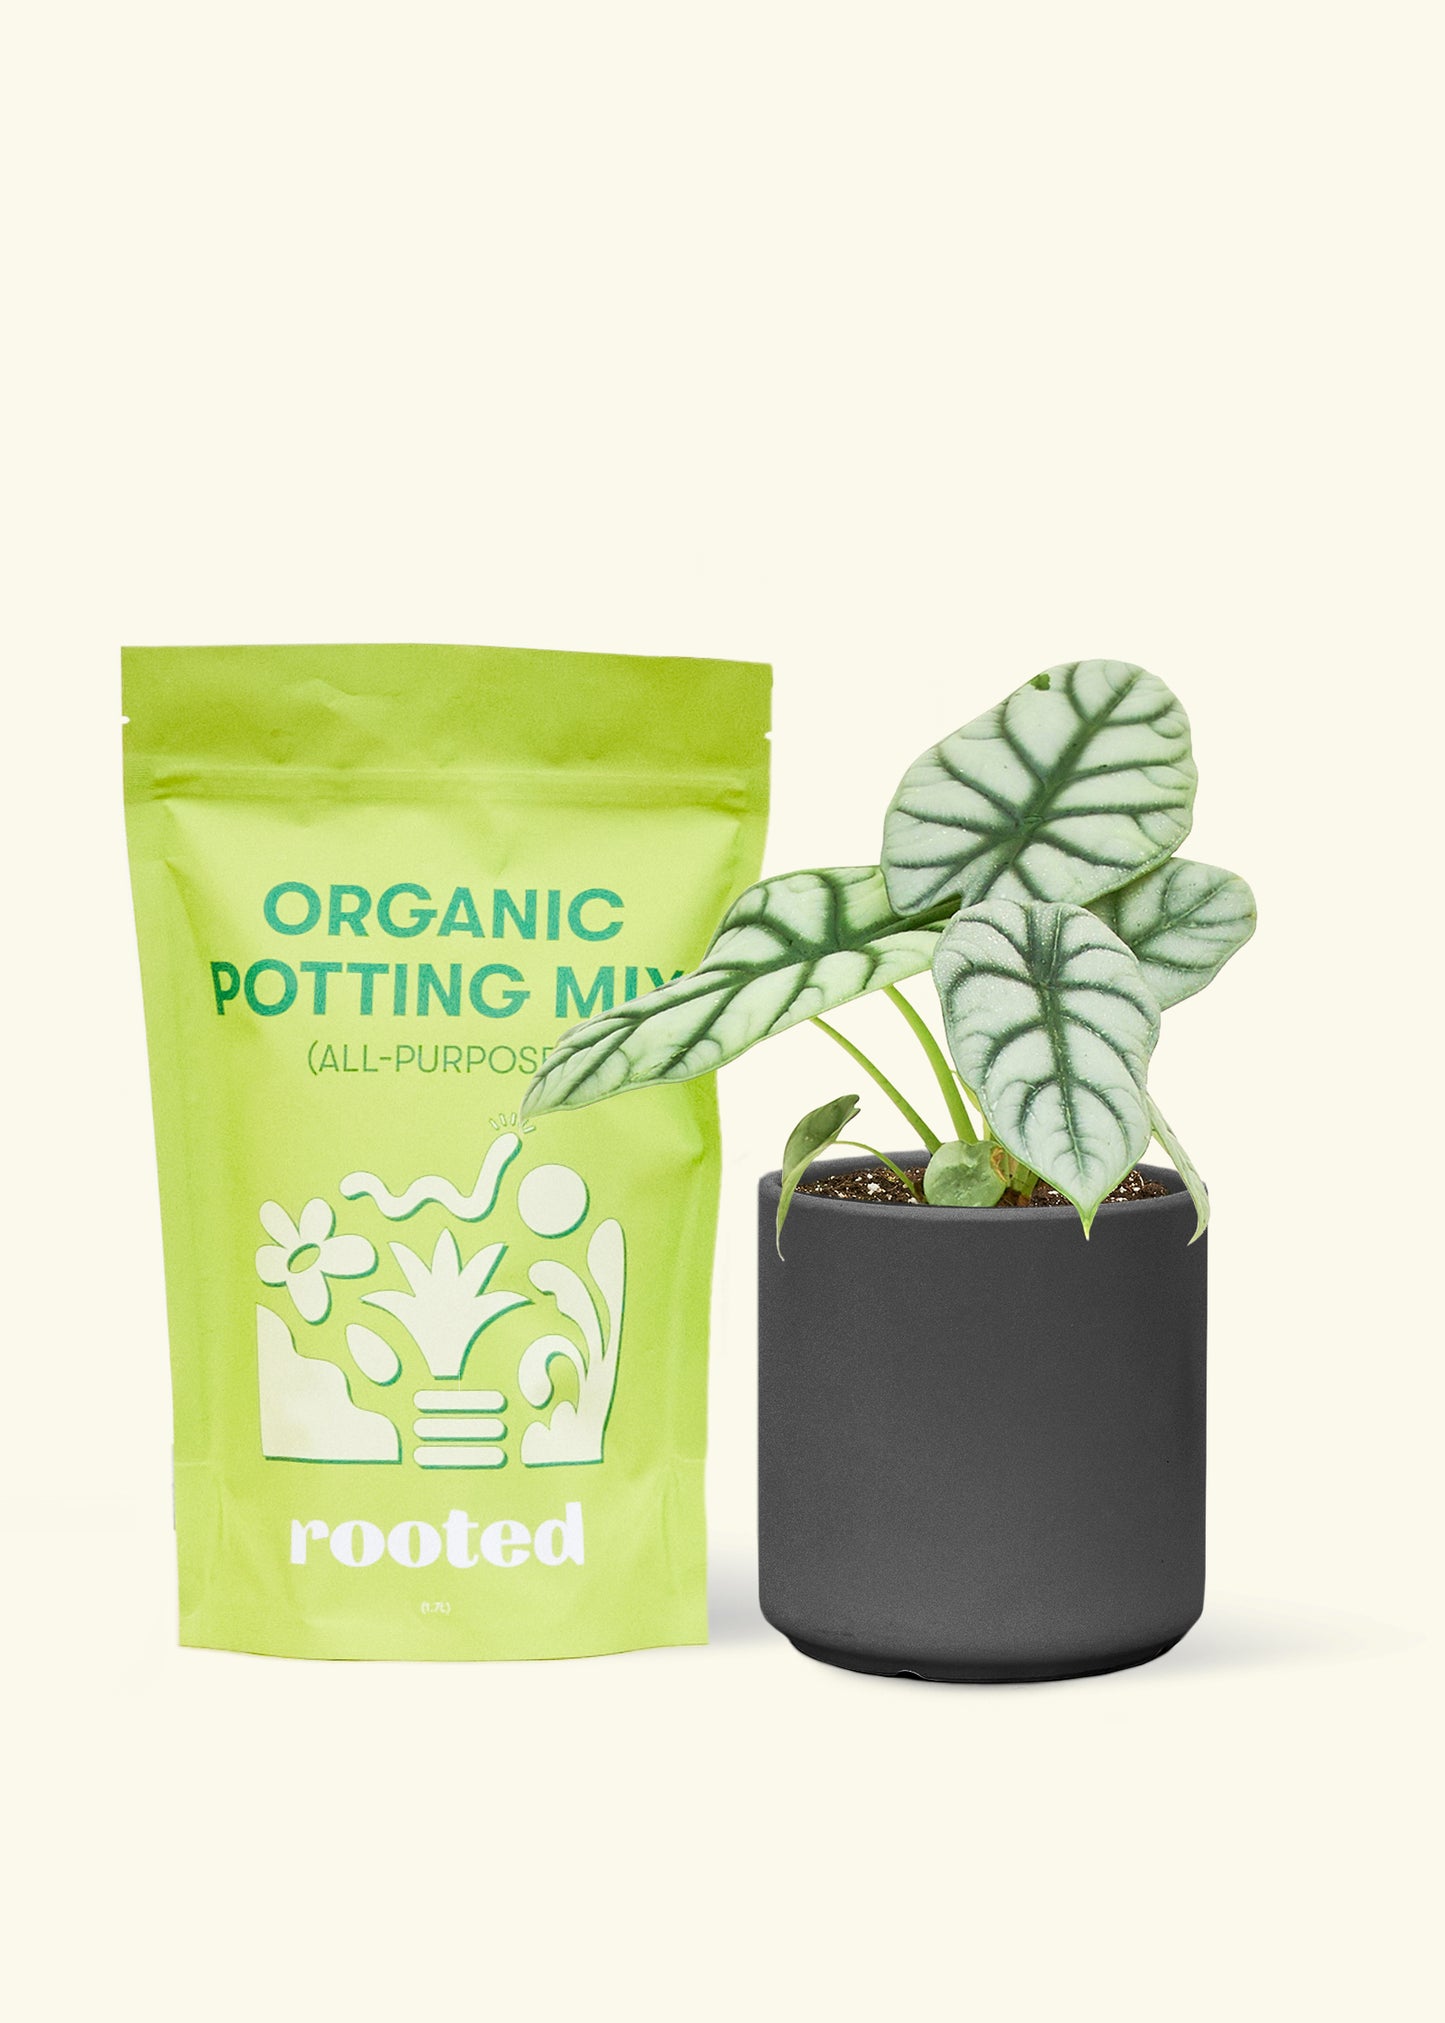 A bag of Organic Potting Mix to the left of a Alocasia 'Silver Dragon' in a black cylinder ceramic pot.